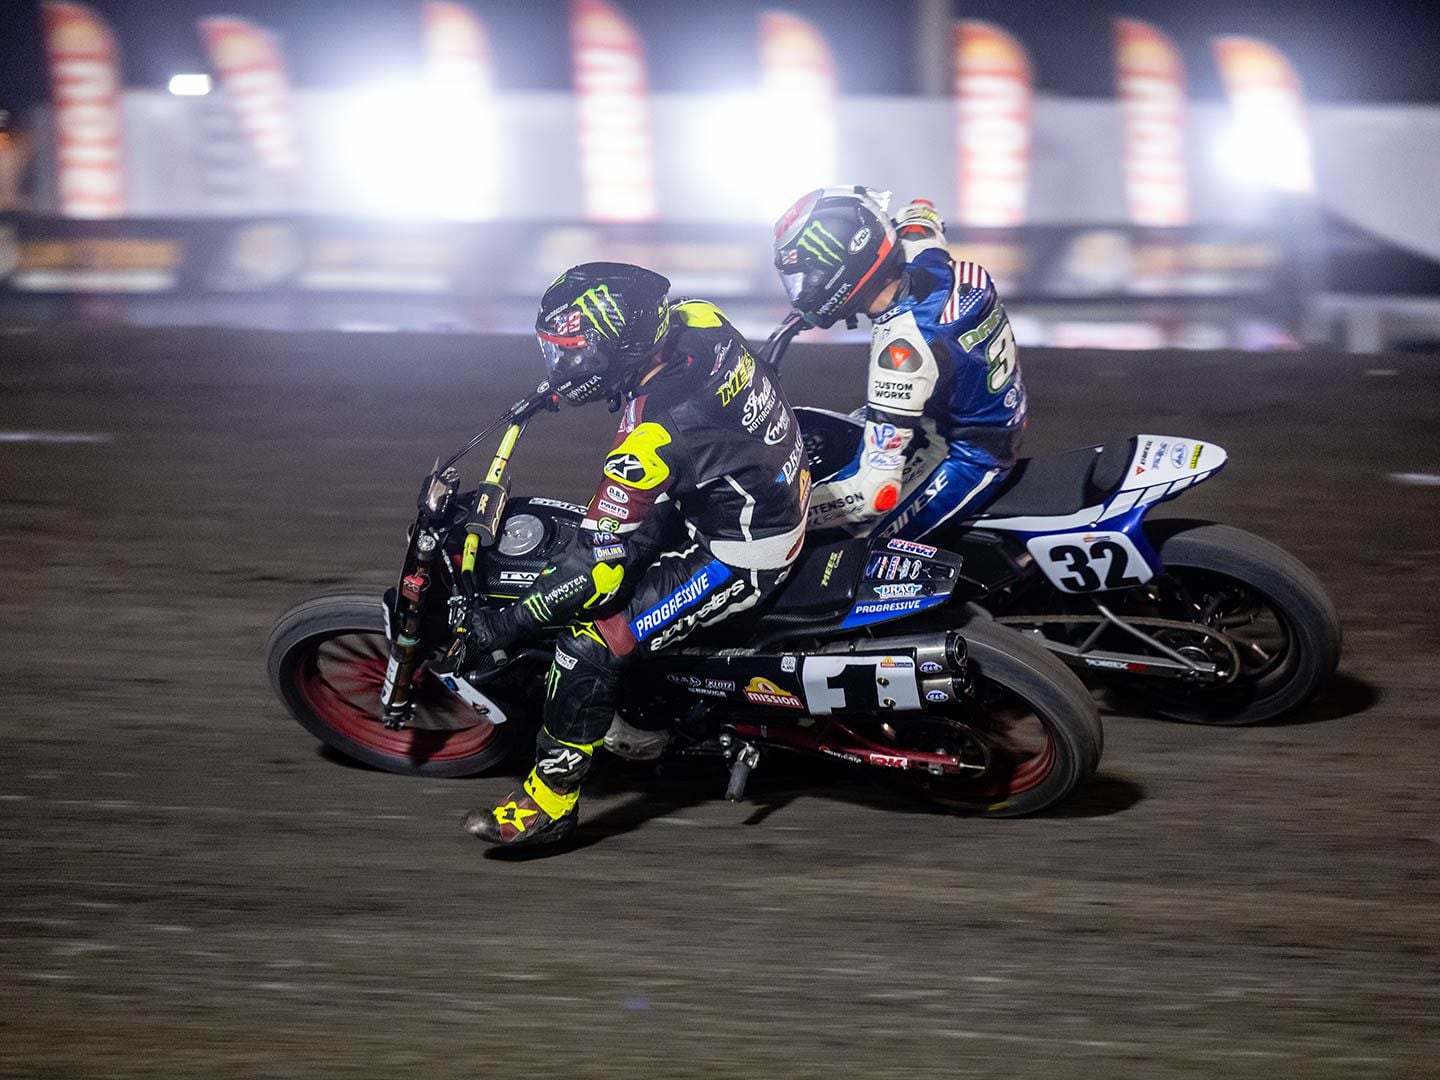 Indian Motorcycle Racing & Reigning Champion Mees Win Silver Dollar Short Track